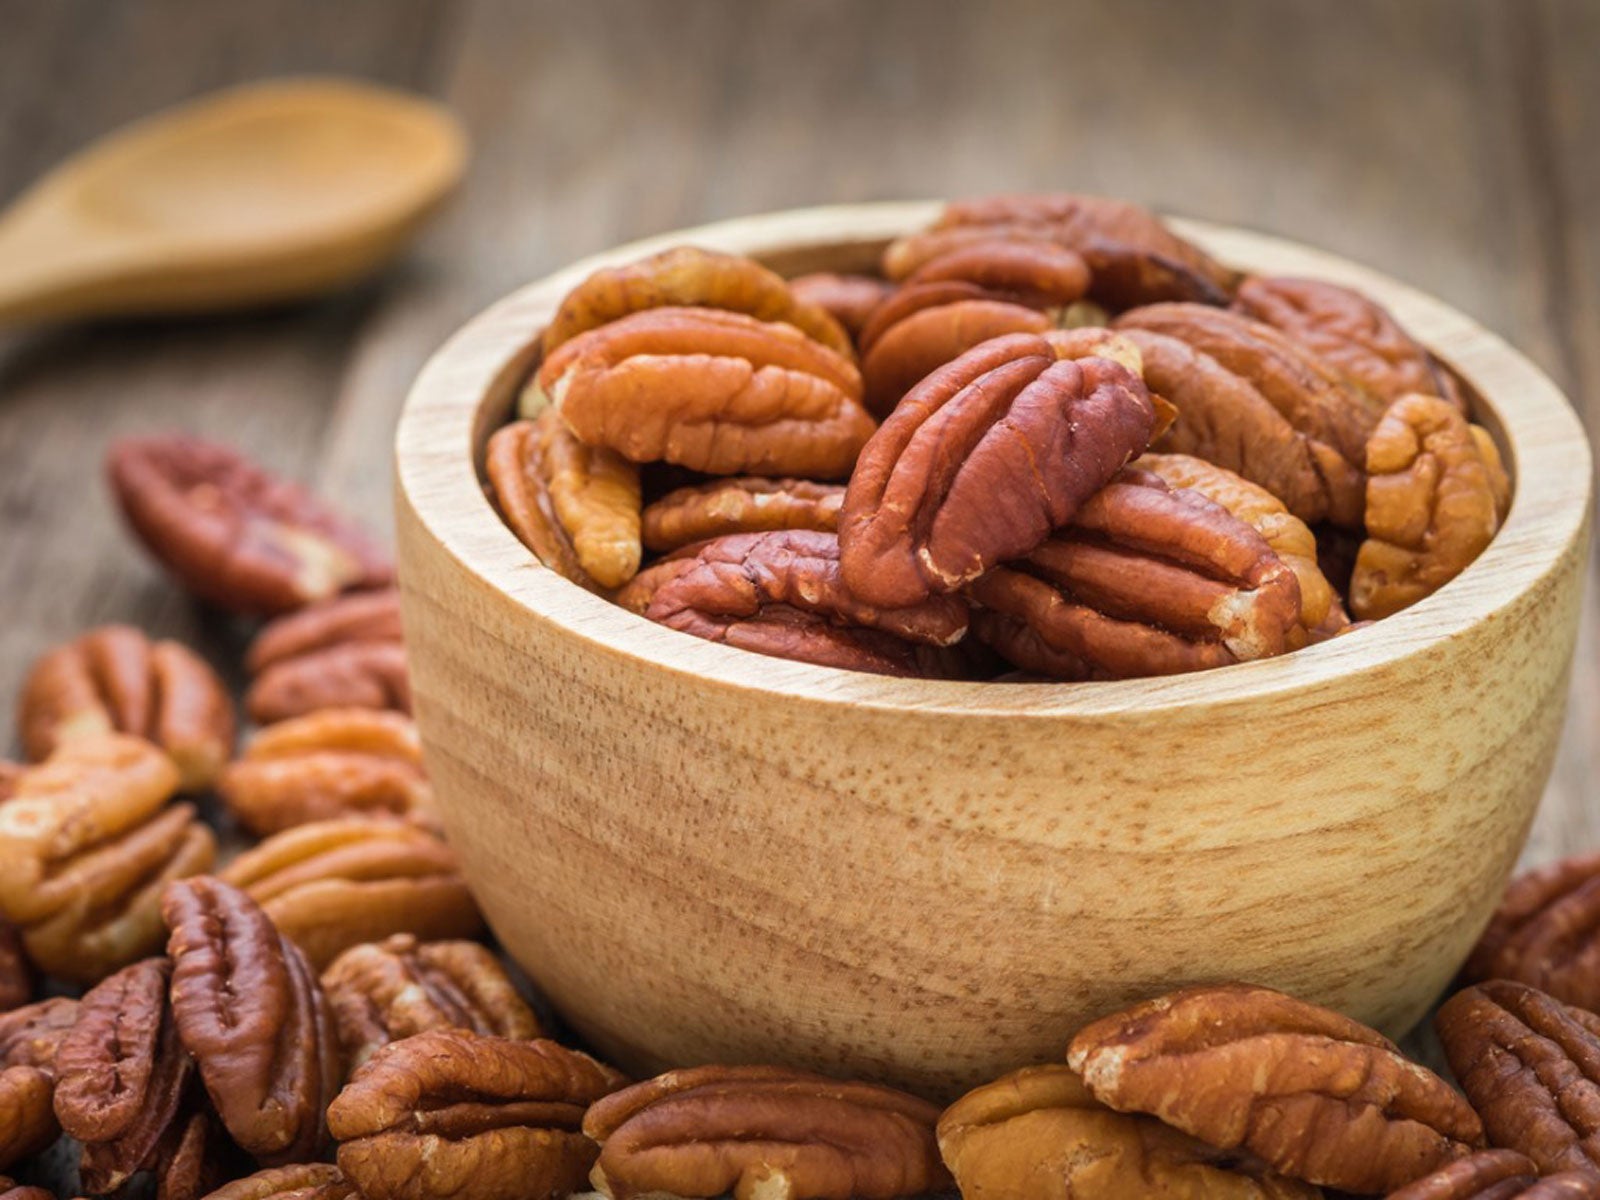 Pecan Uses - How To Use Pecans From Your Harvest